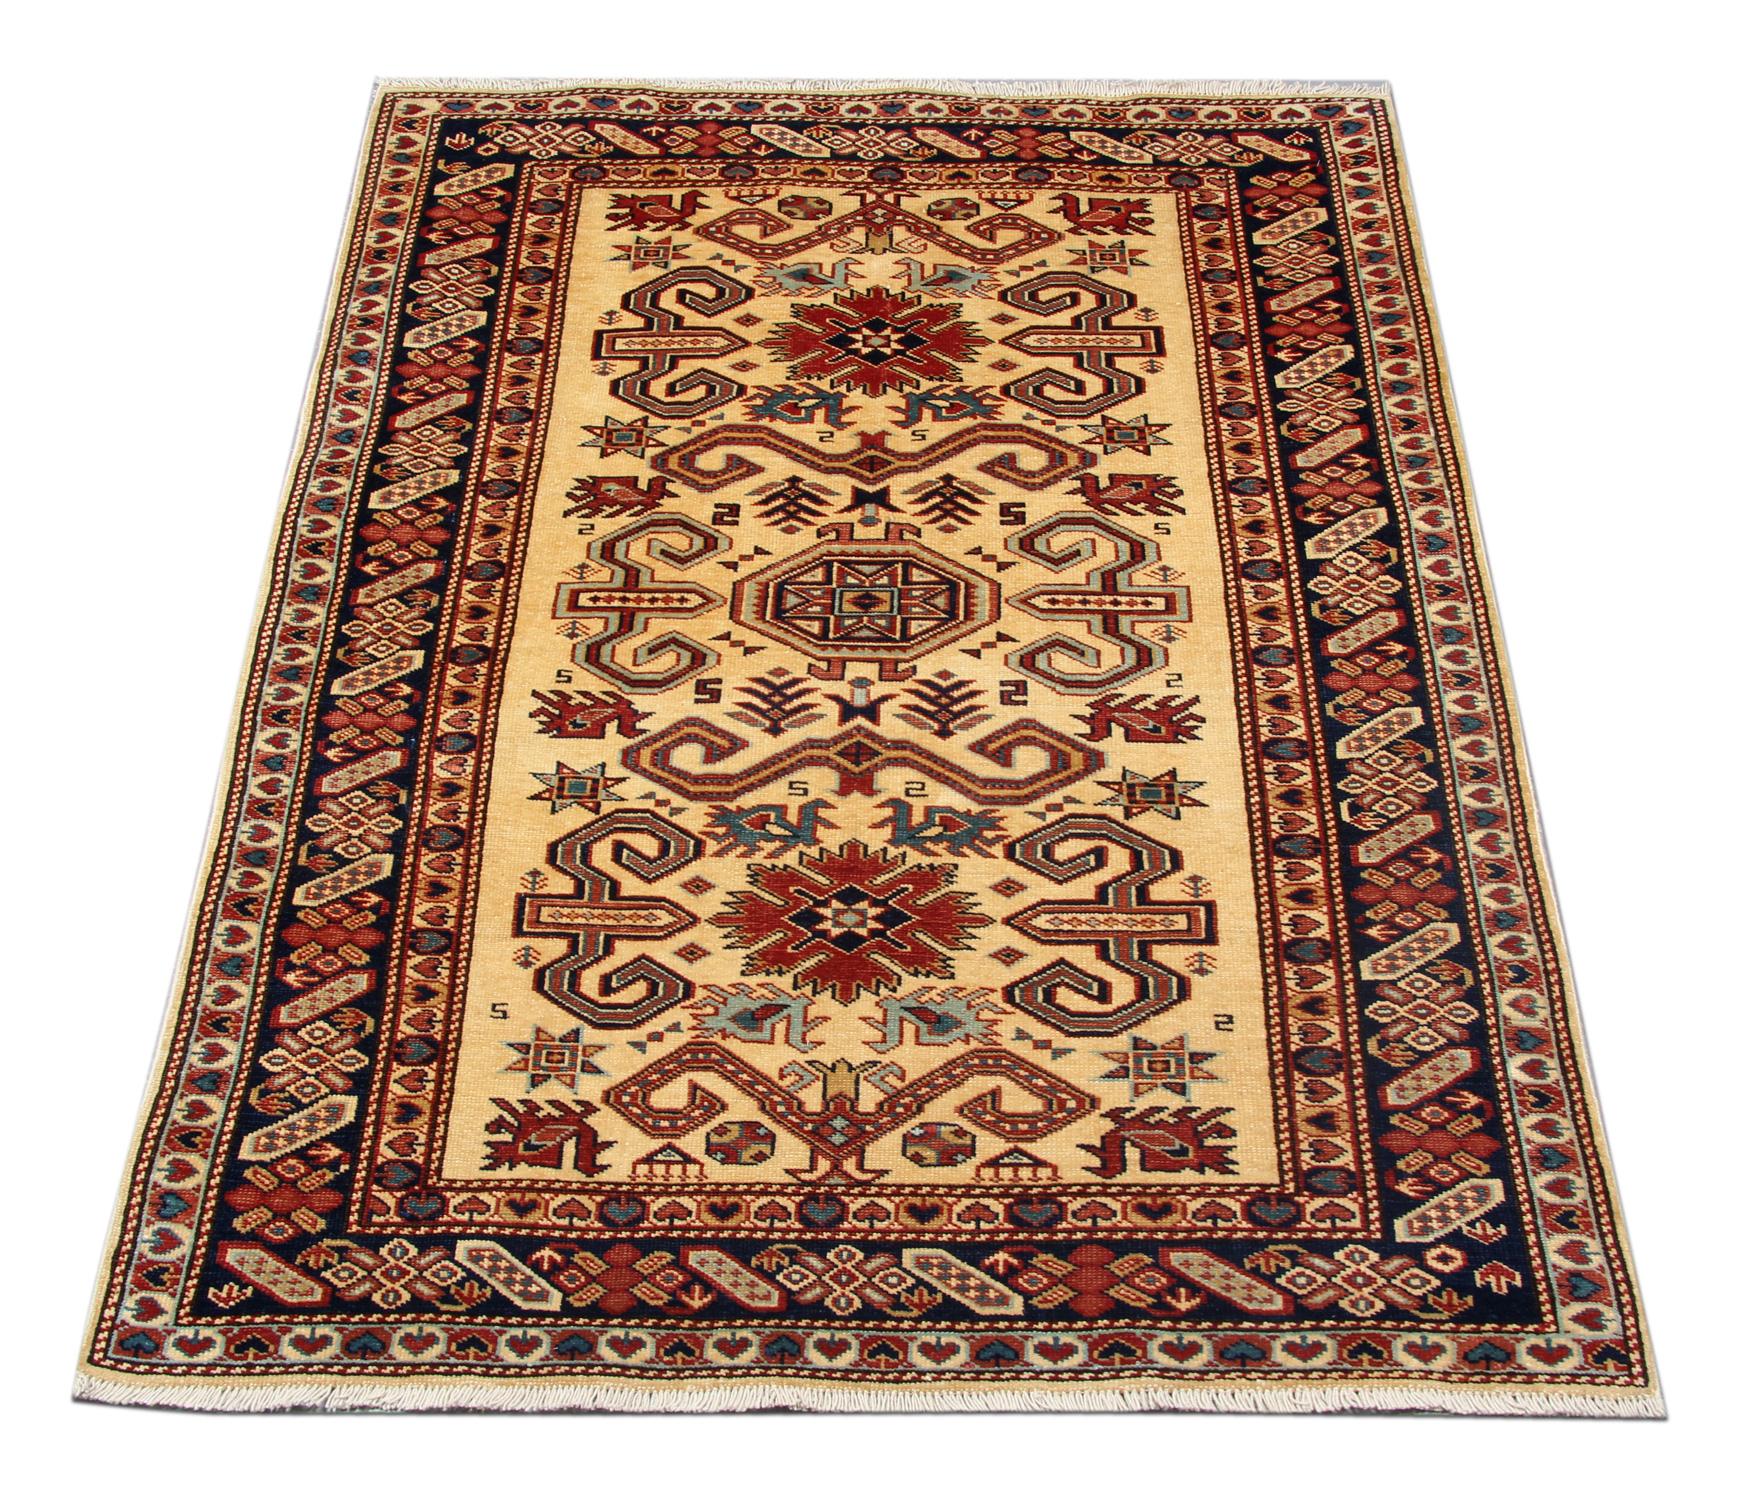 These new traditional handmade rugs feature designs from the Kazak region in Caucasia. A conventional tribal rug is famous in the part of Kazak Area. Afghan weavers have made this handwoven rug of quality handspun wool and cotton. This high-quality